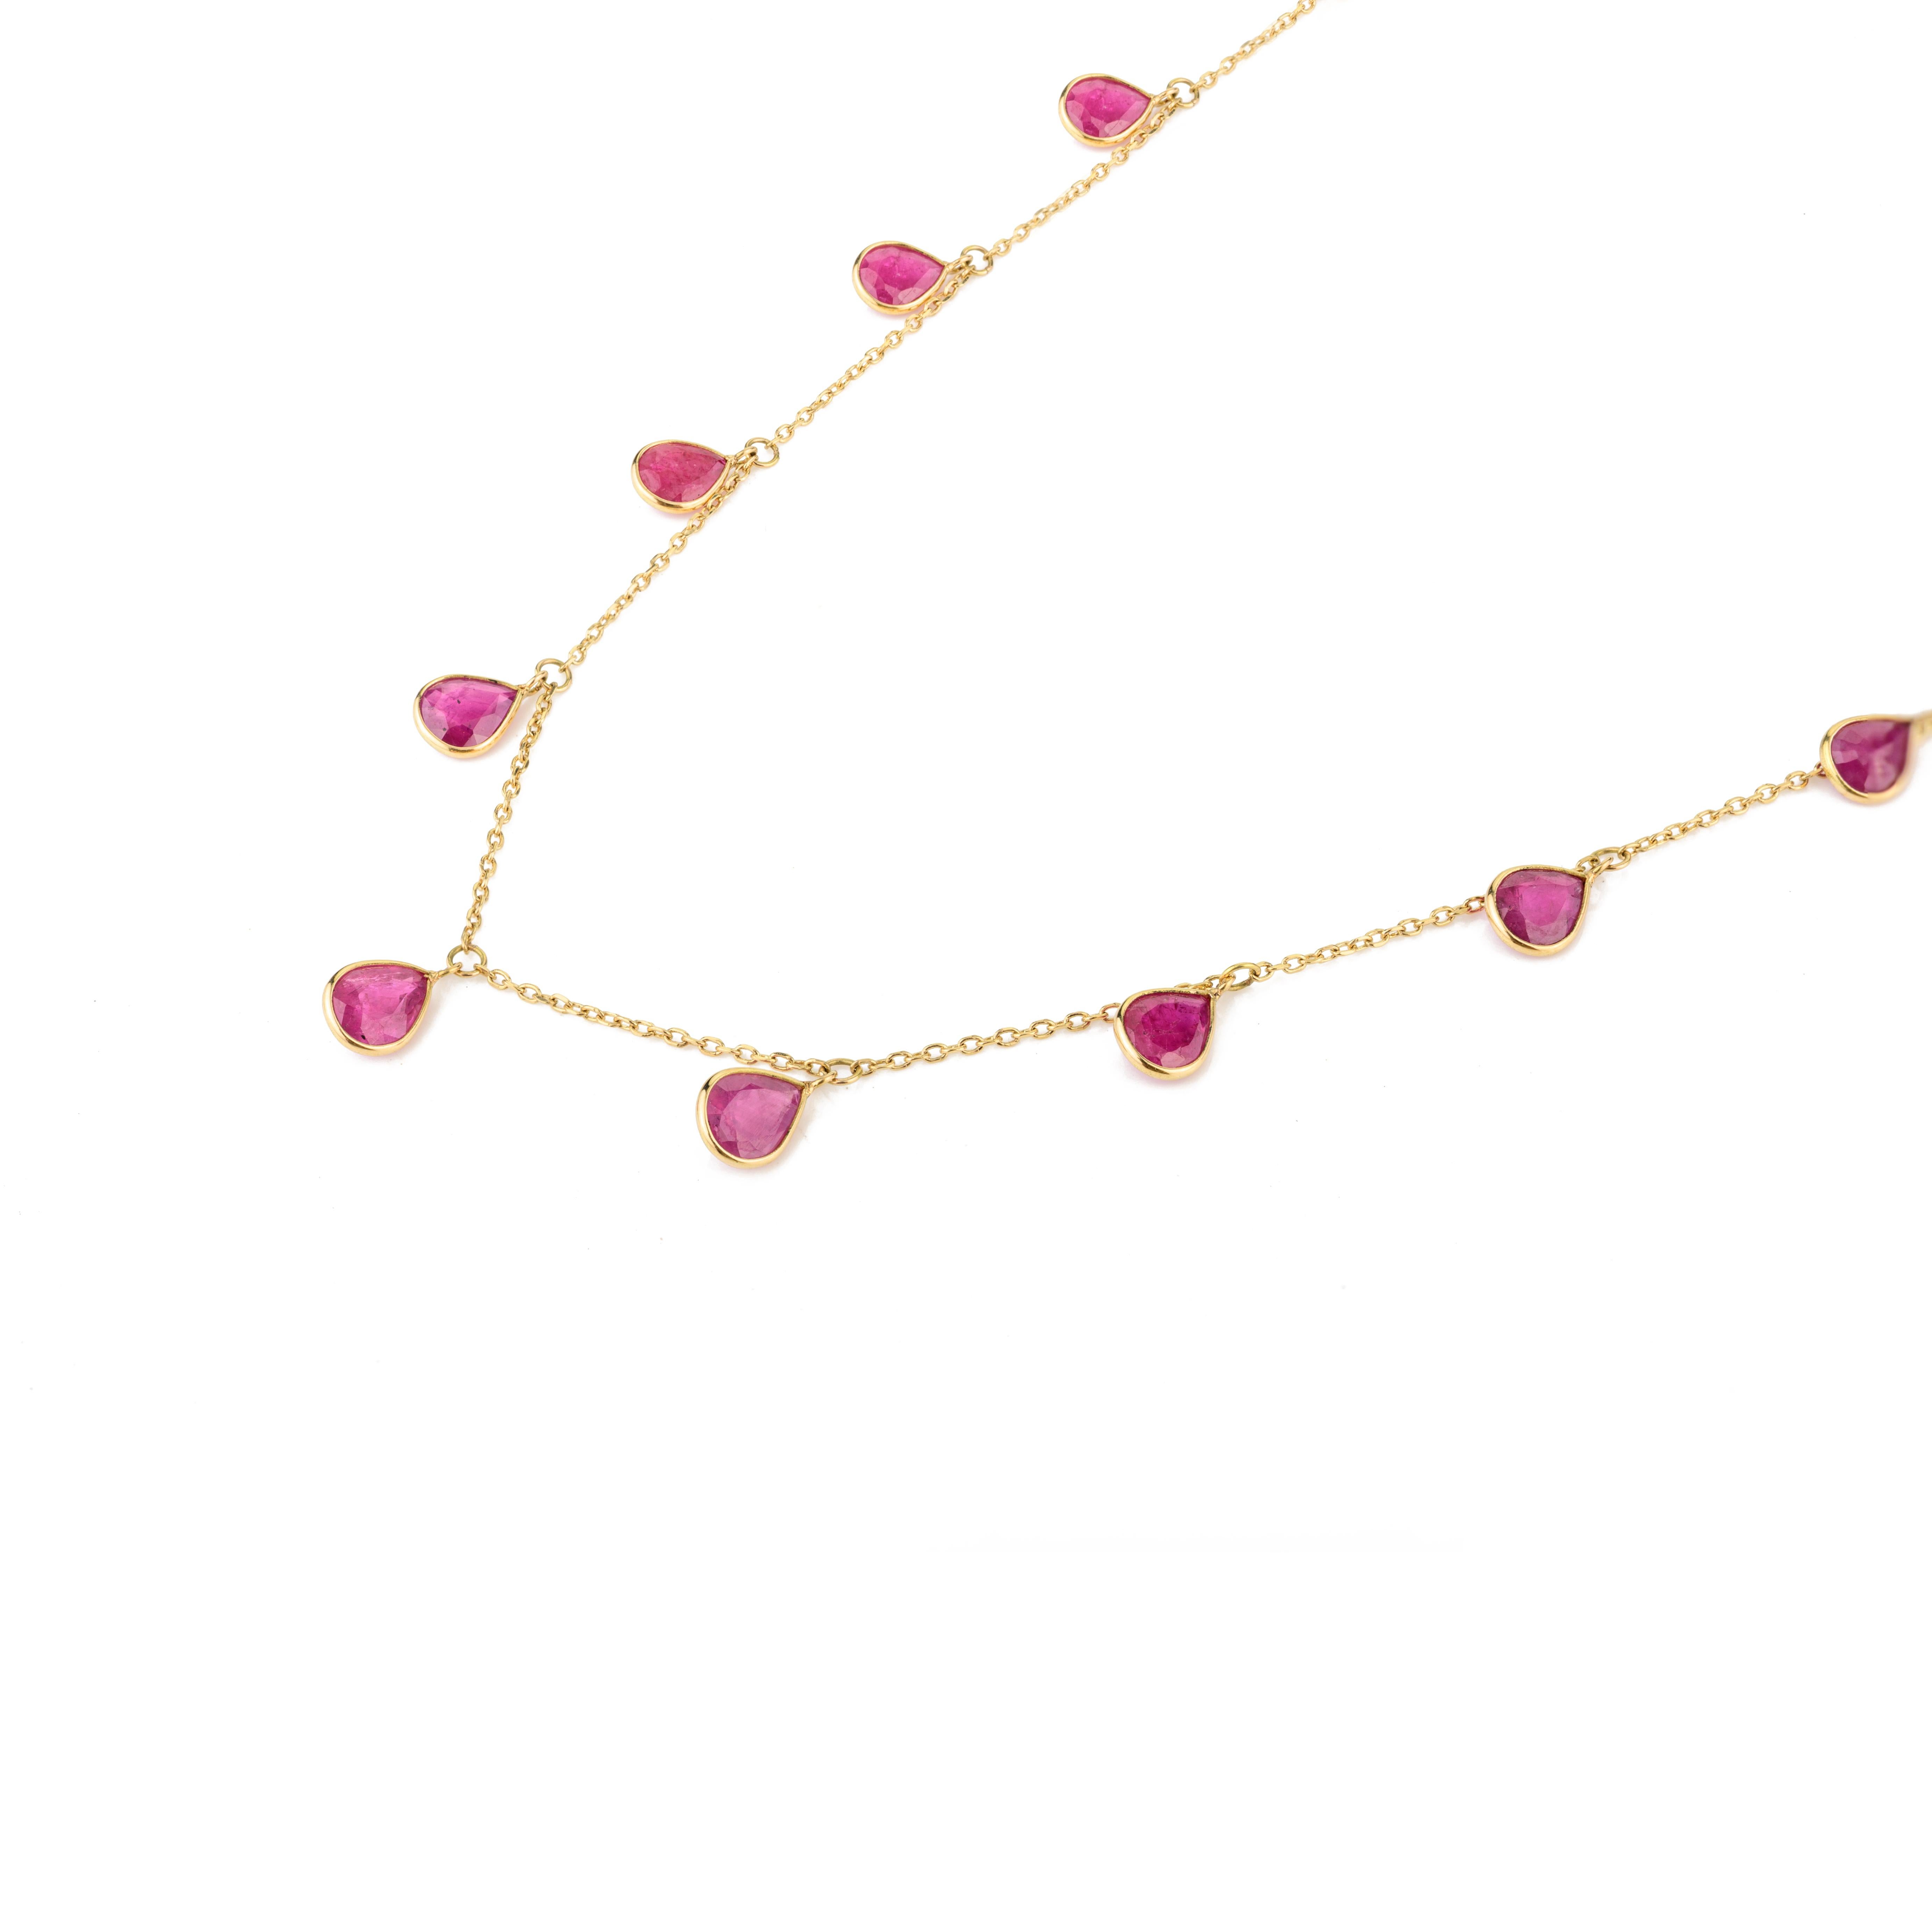 Pear Bezel Set Ruby Fringe Necklace in 18 Karat Yellow Gold Gift for Women In New Condition For Sale In Houston, TX